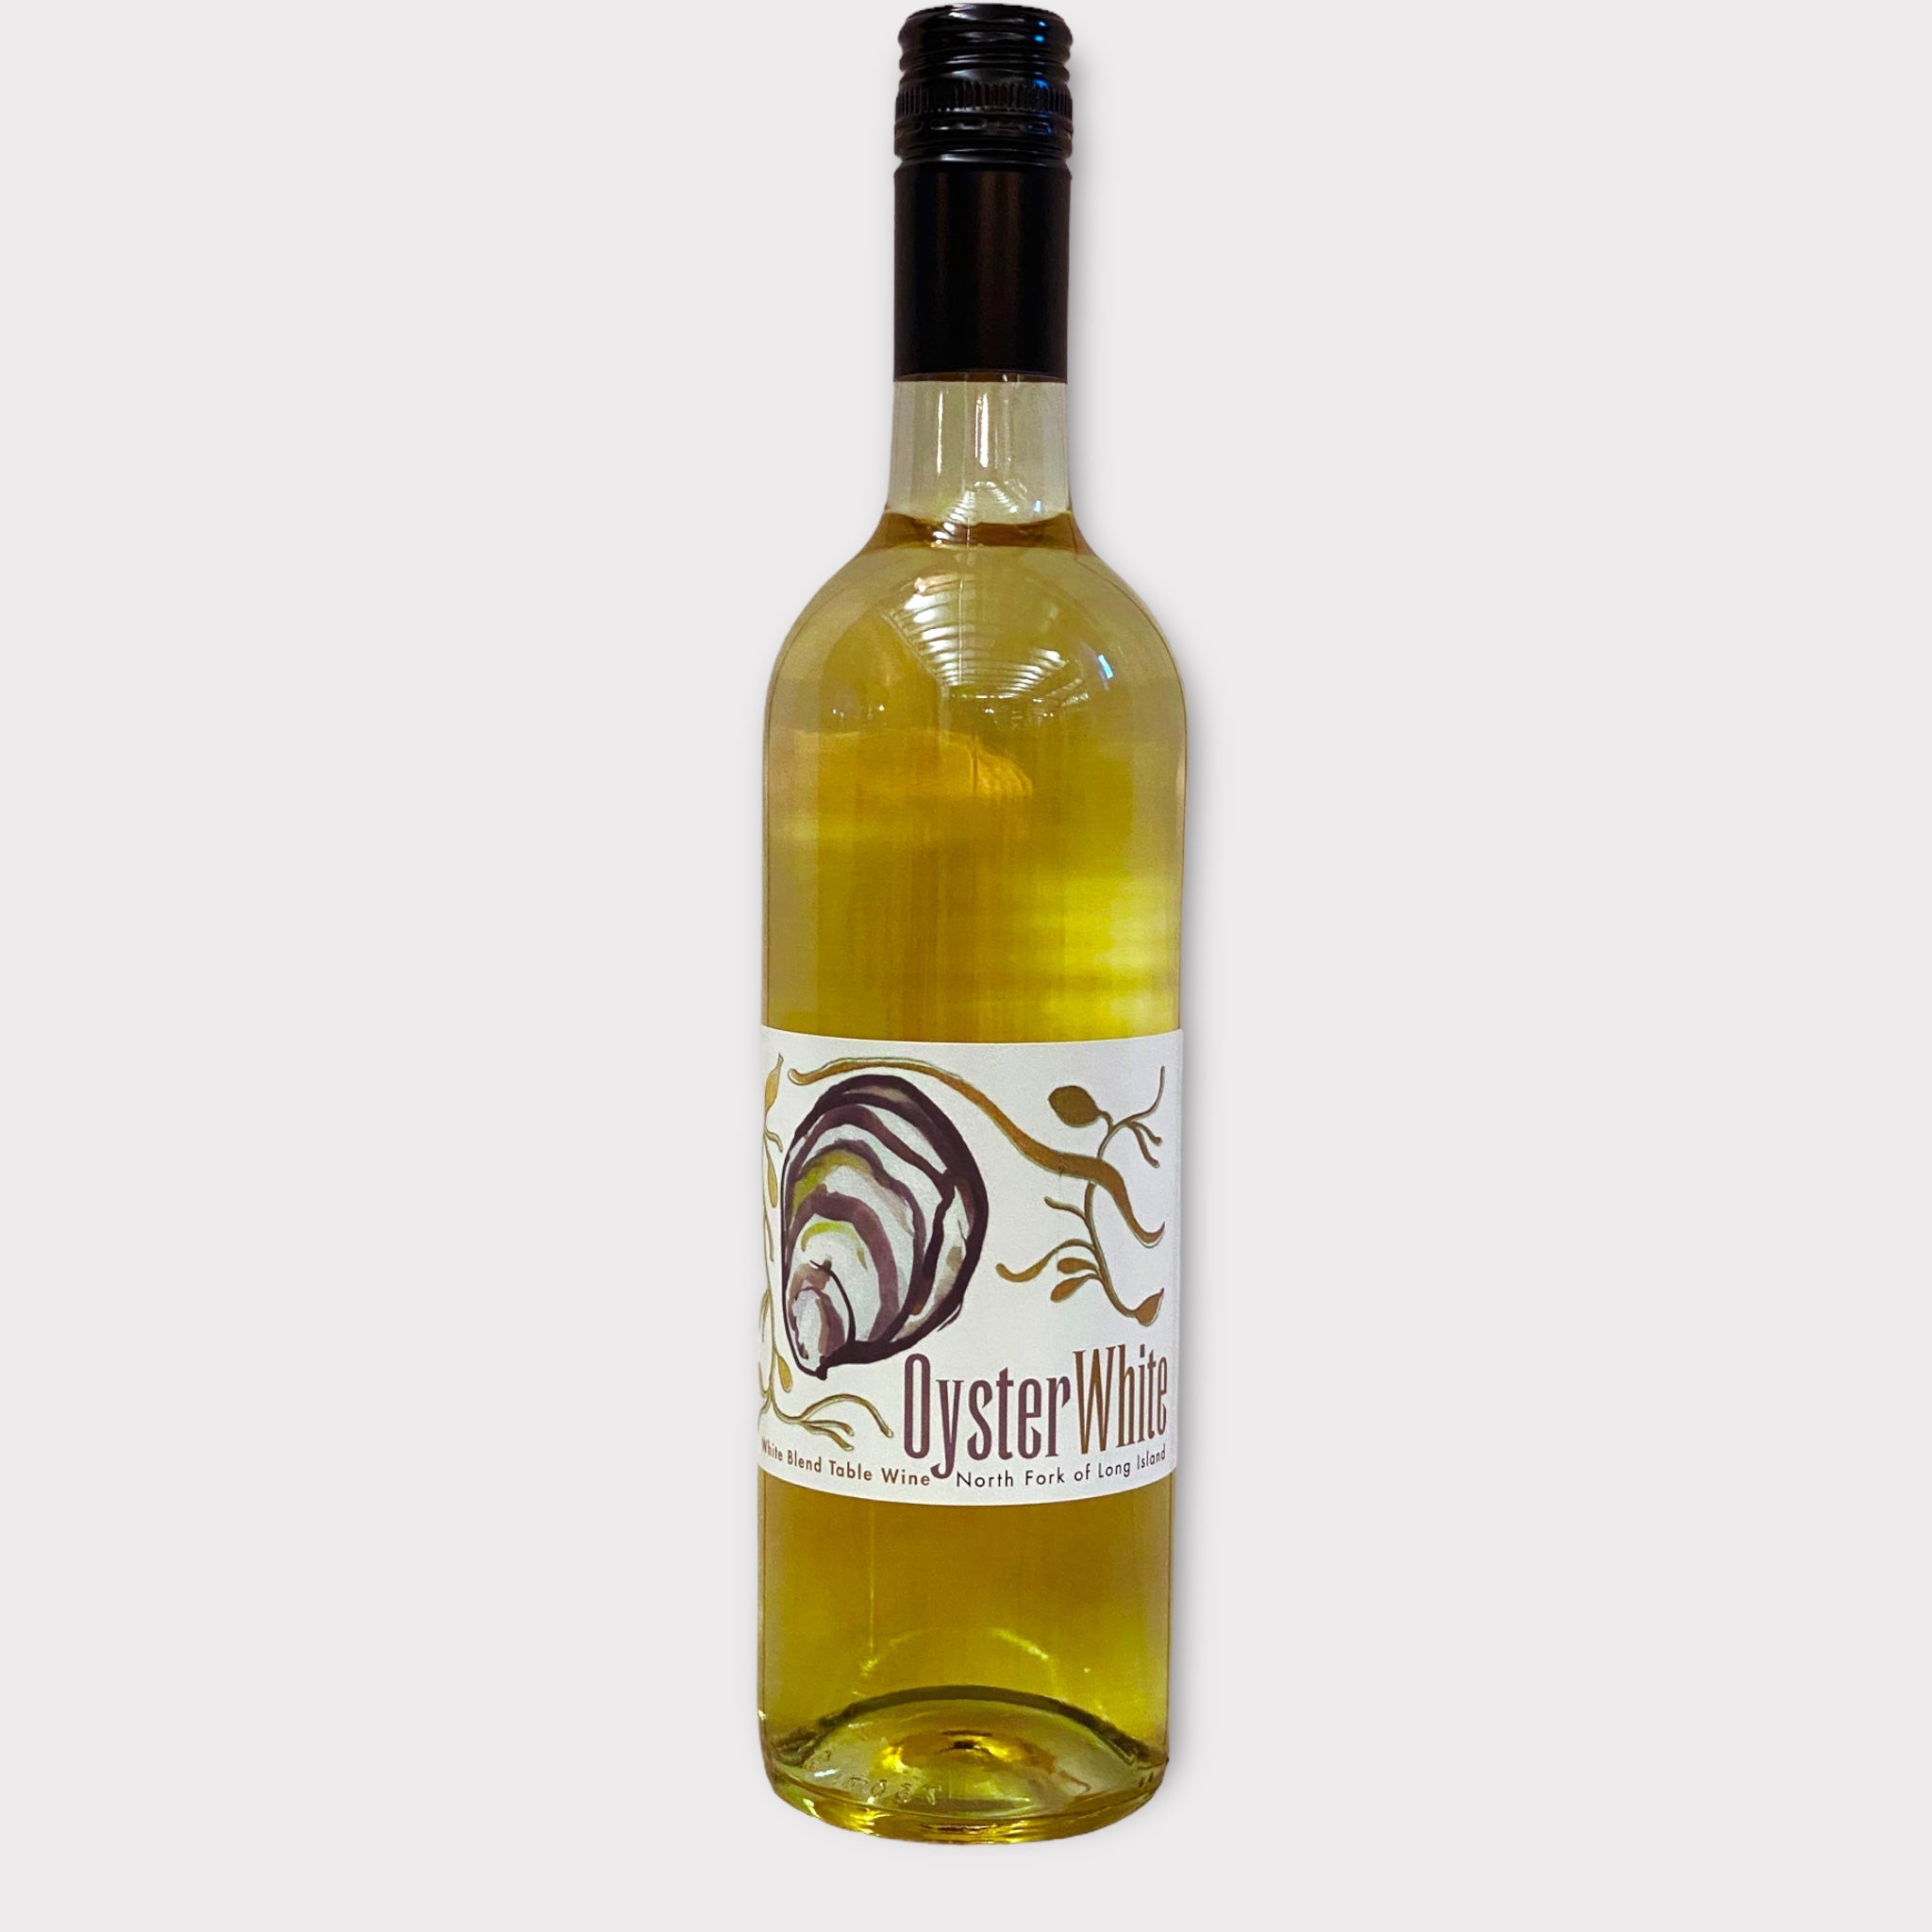 Oyster White - One Woman Winery